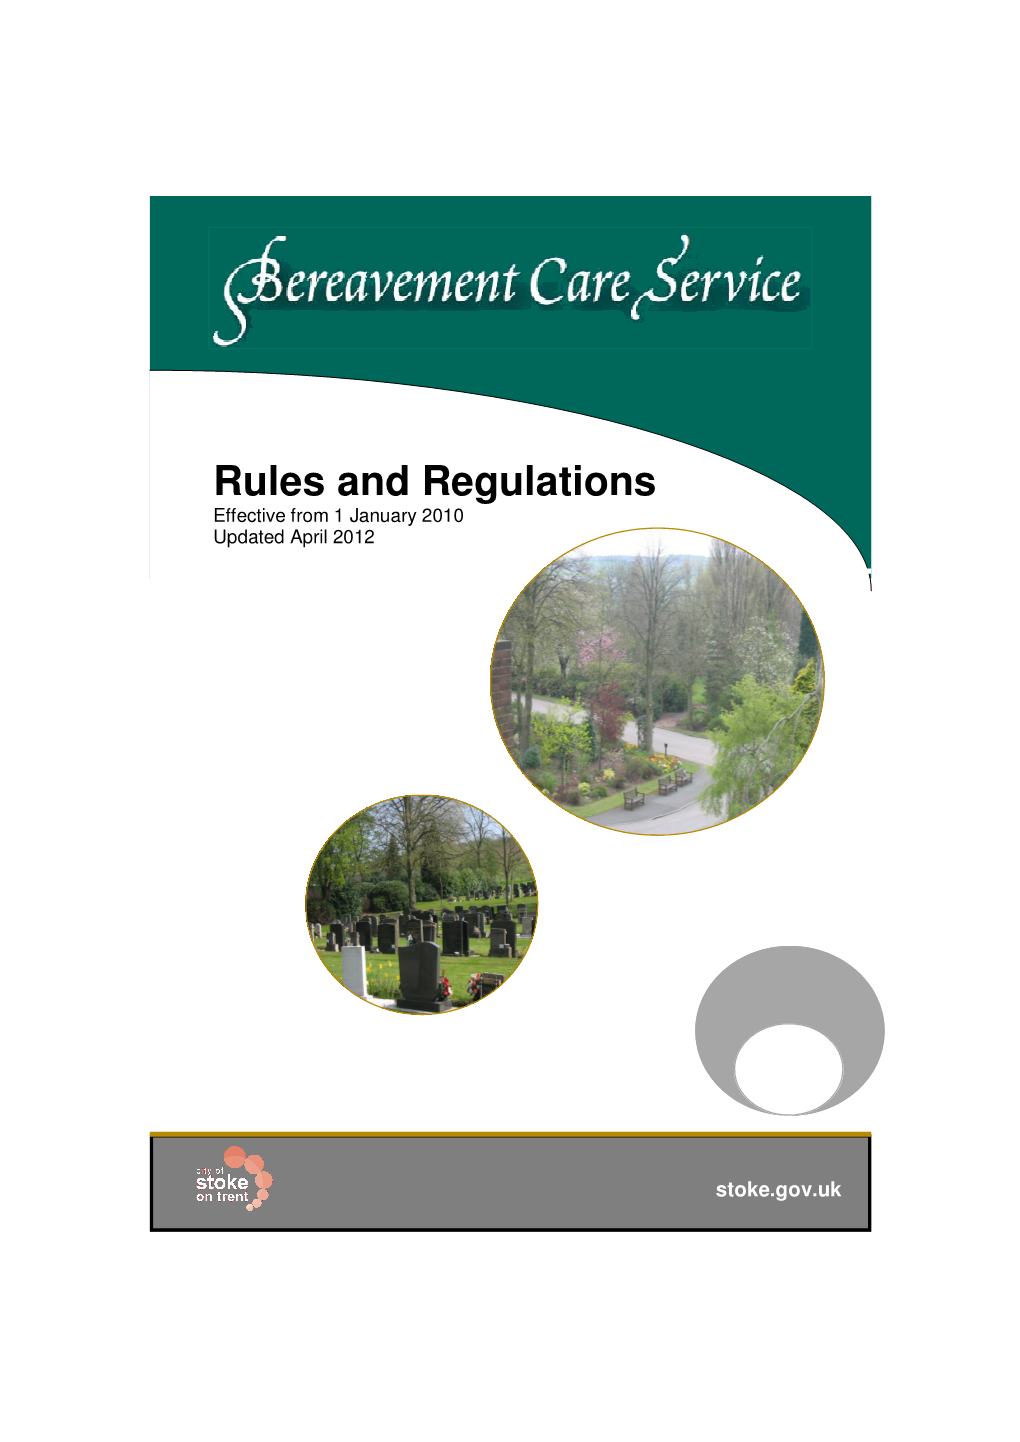 Rules and Regulations Effective from 1 January 2010 Updated April 2012